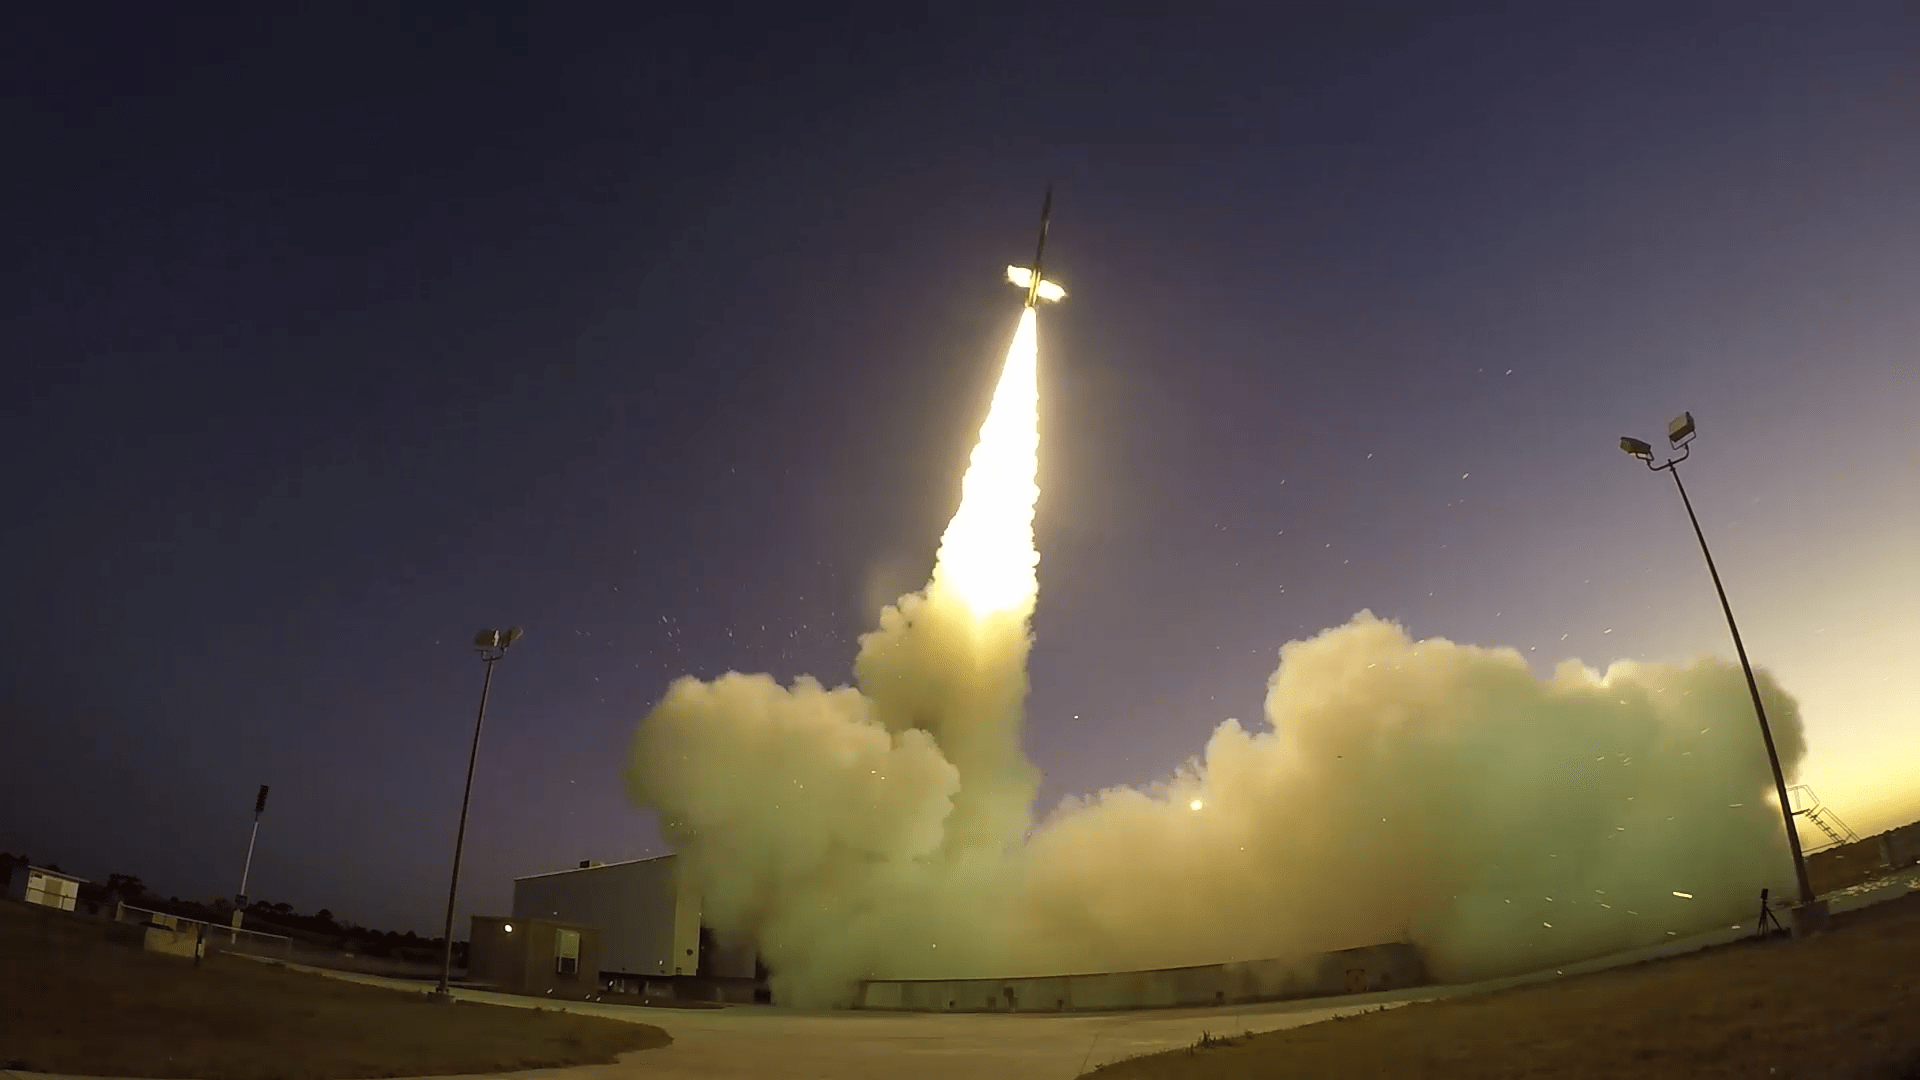 A 58-foot-tall Black Brant IX sounding rocket launches from NASA’s Wallops Flight Facility on Oct. 4. This was the first test of the Mars 2020 mission's parachute-testing series, the Advanced Supersonic Parachute Inflation Research Experiment, or ASPIRE.